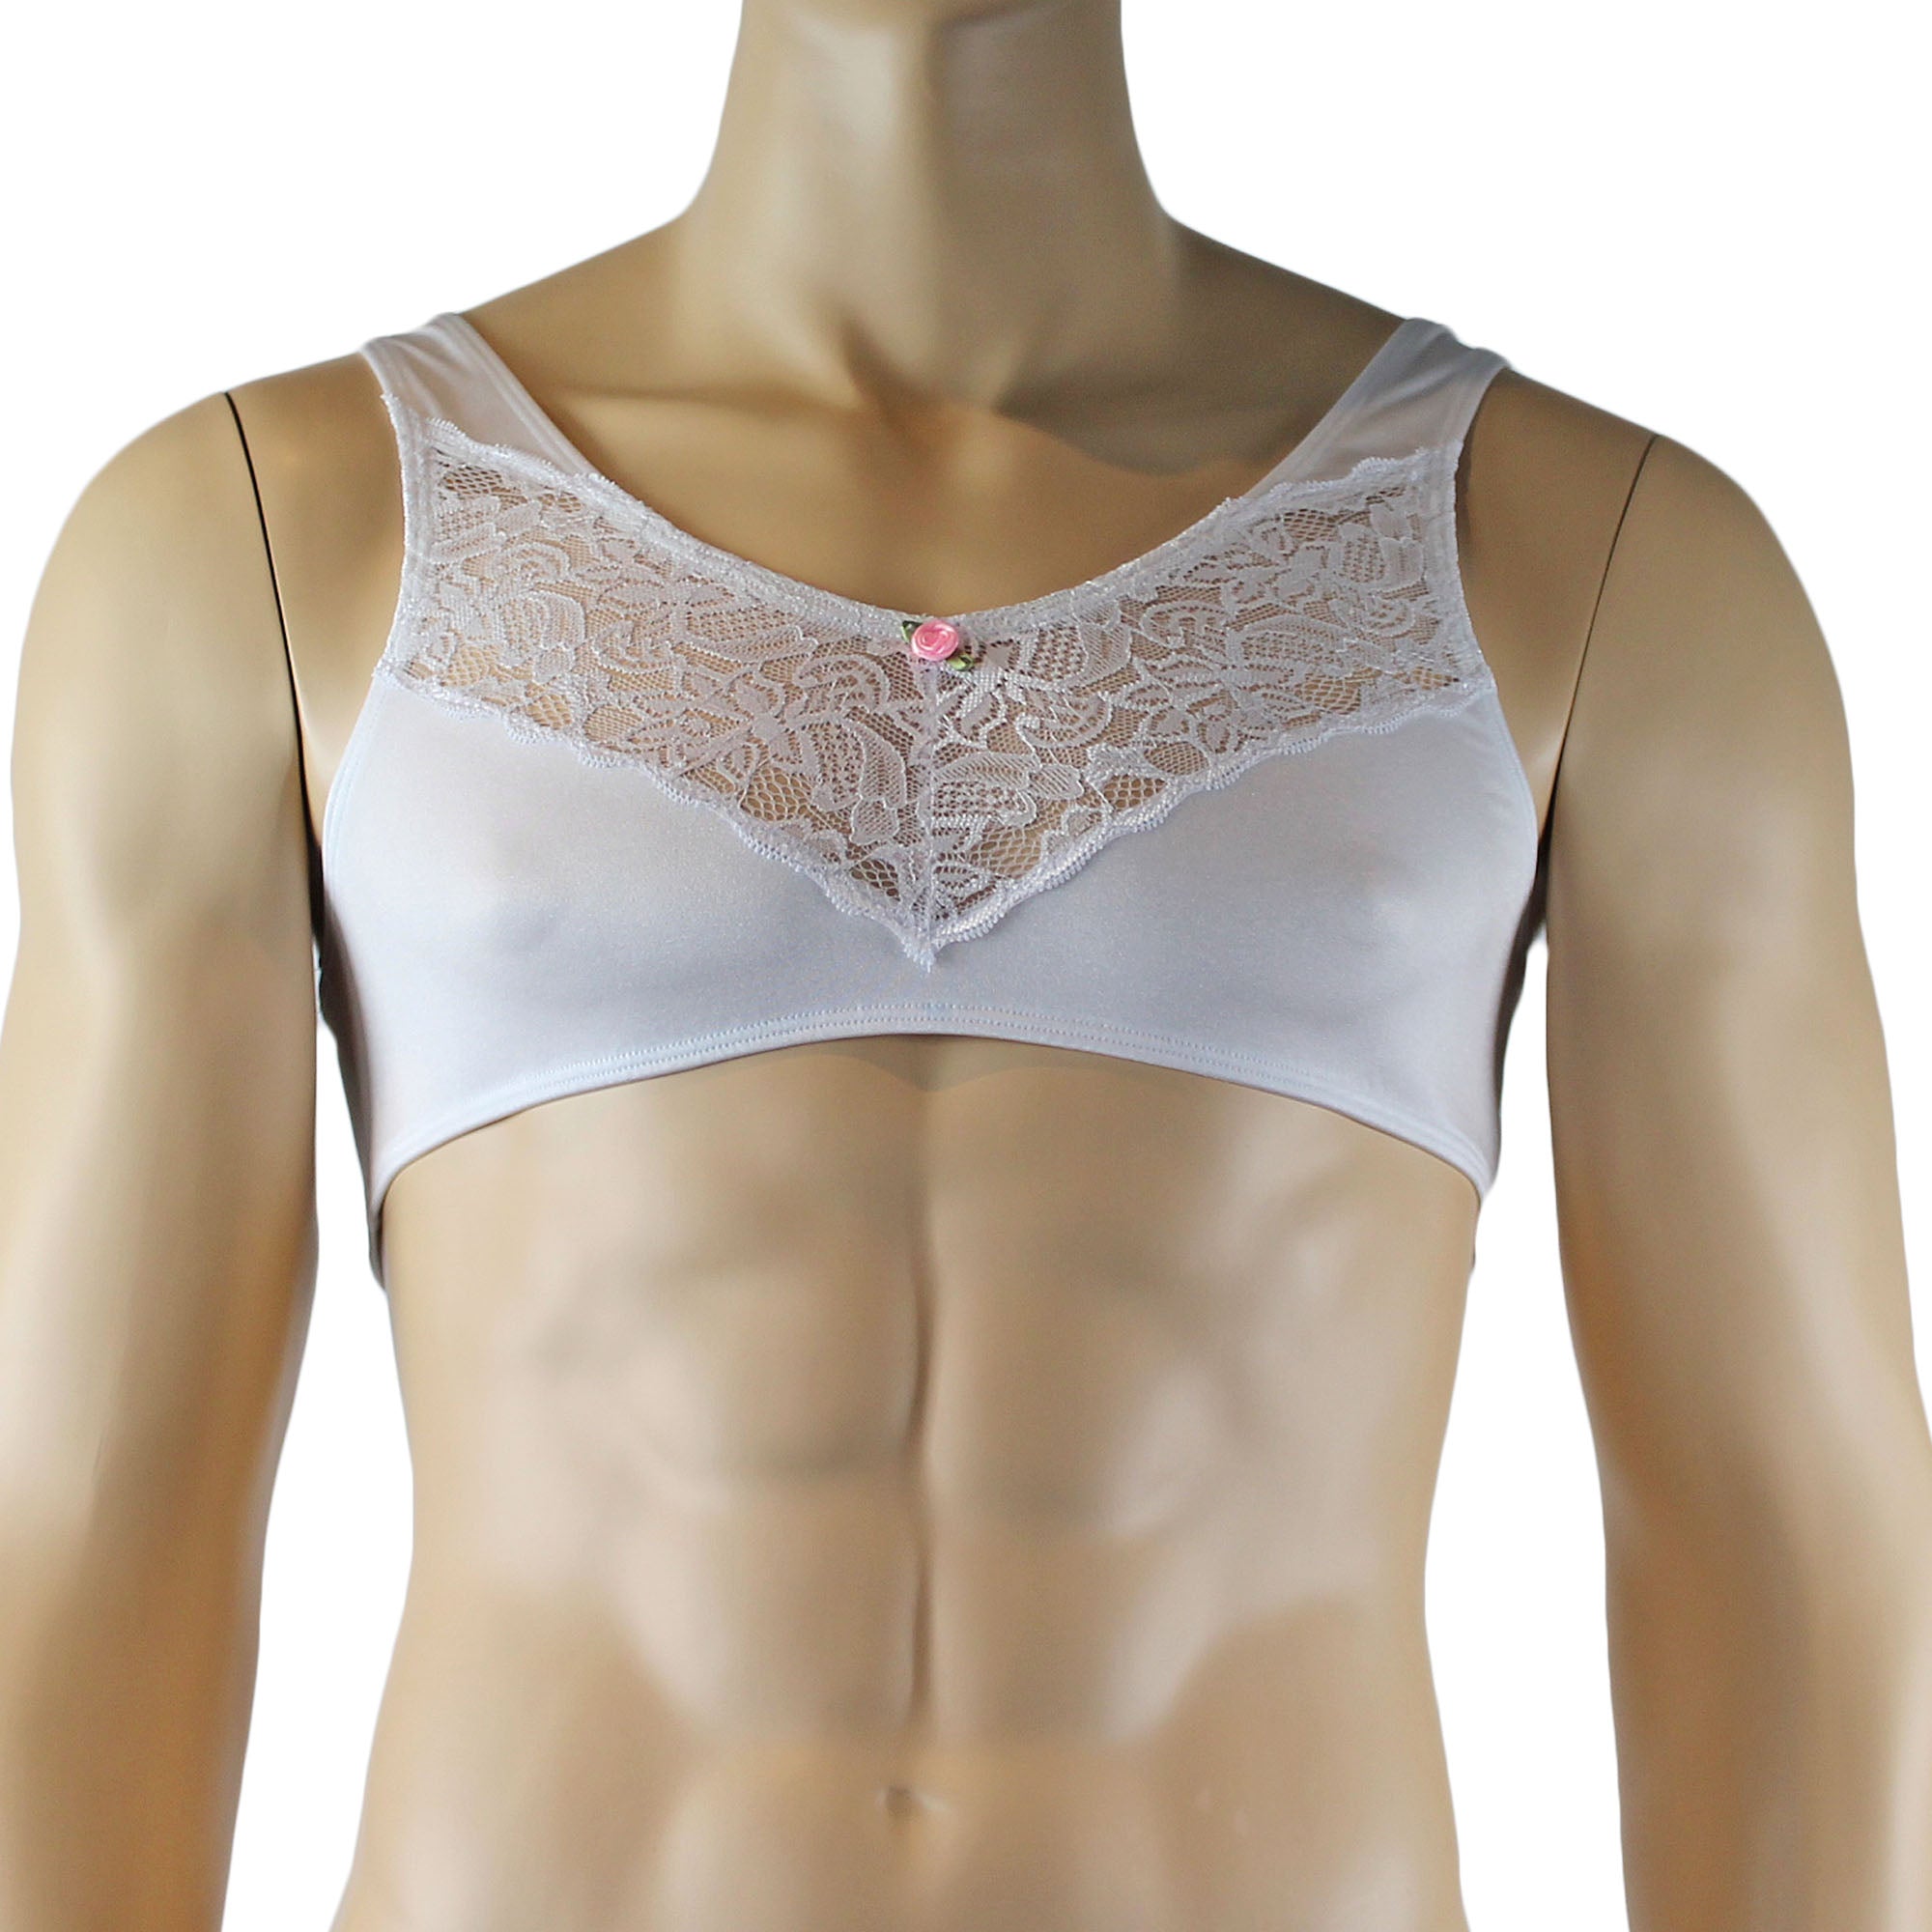 Male Penny Lingerie Bra Top with V Lace Front White